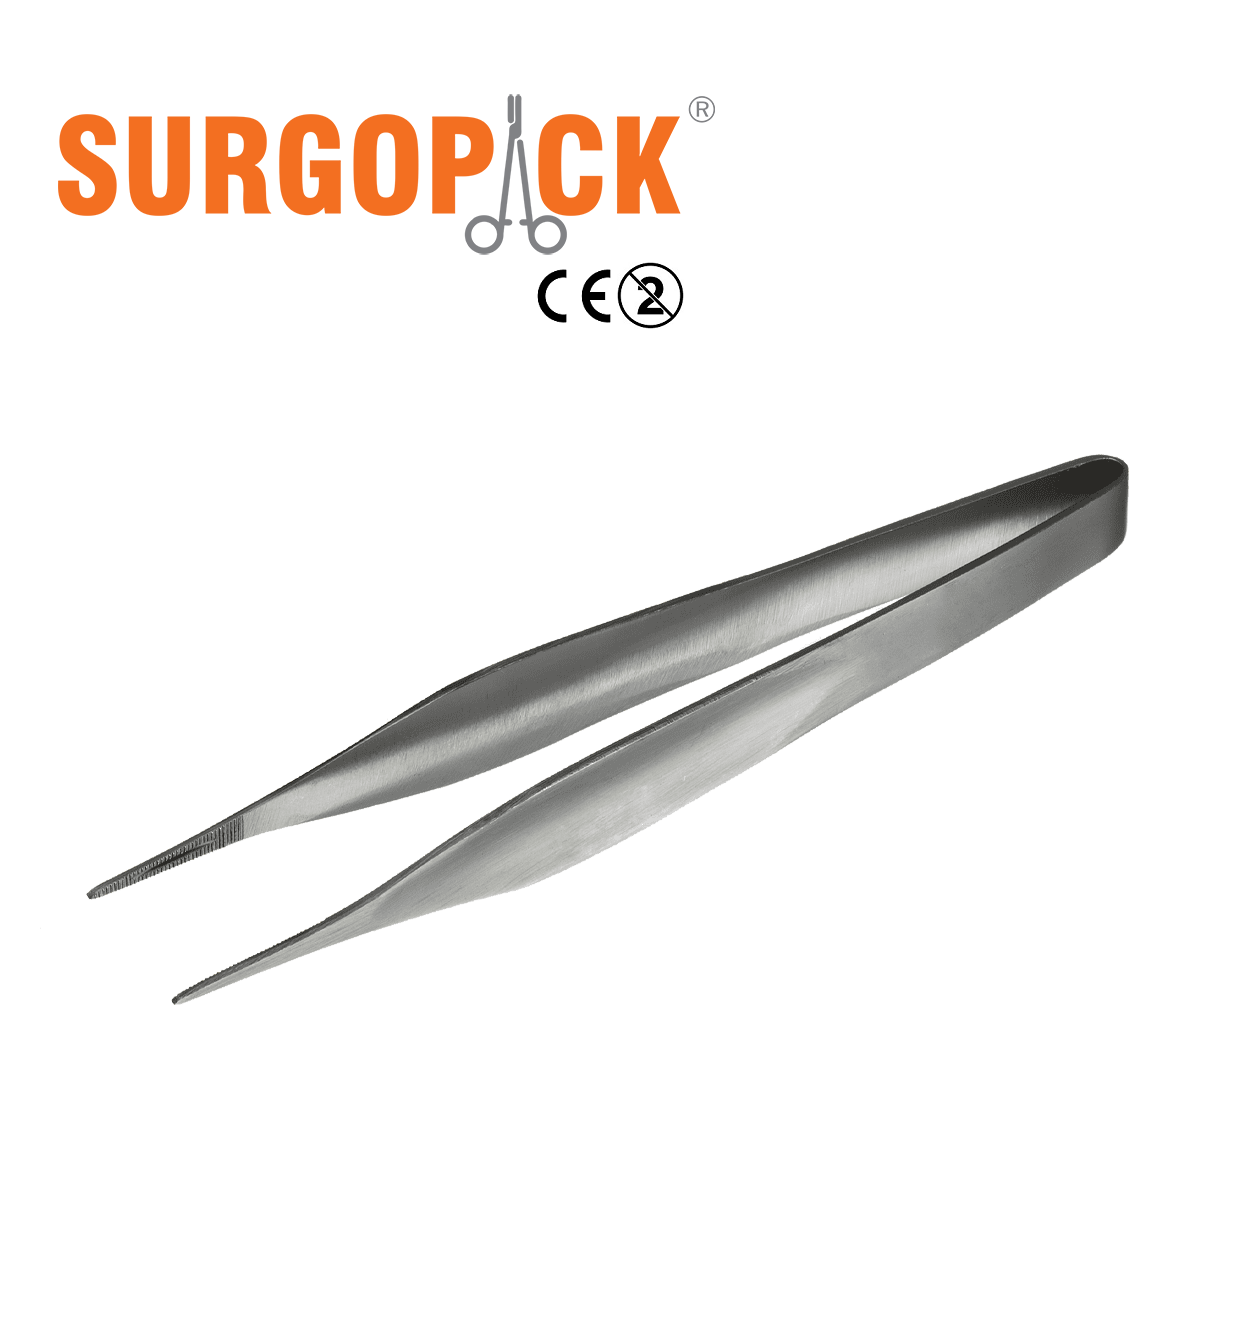 Box 50 Surgopack® Sterile Single Use Martins Splinter Forceps 11cm, 4.5" Individually Packed Disposable - Surgical instruments company